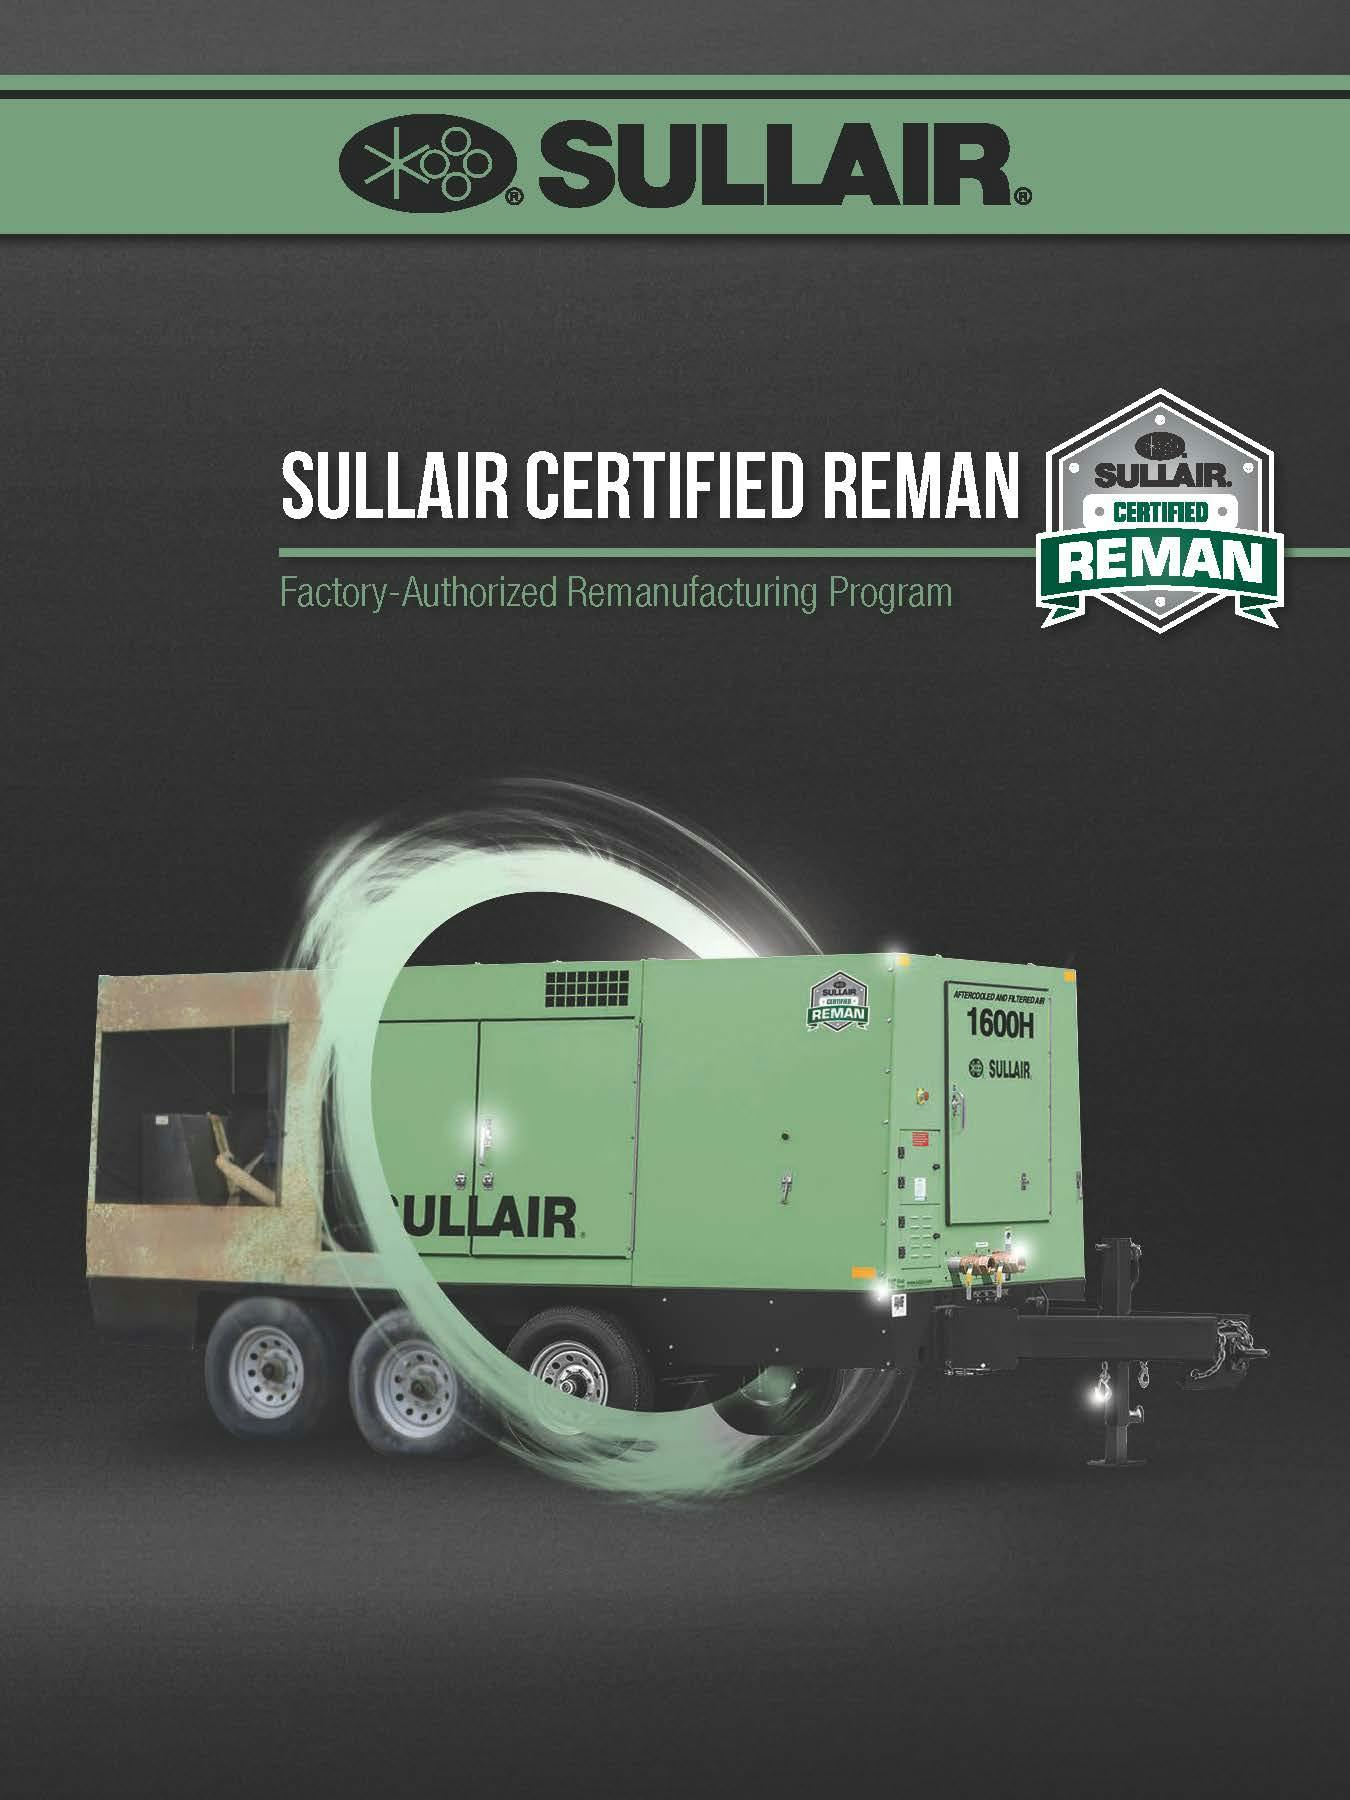 sullair remanufactured air compressors